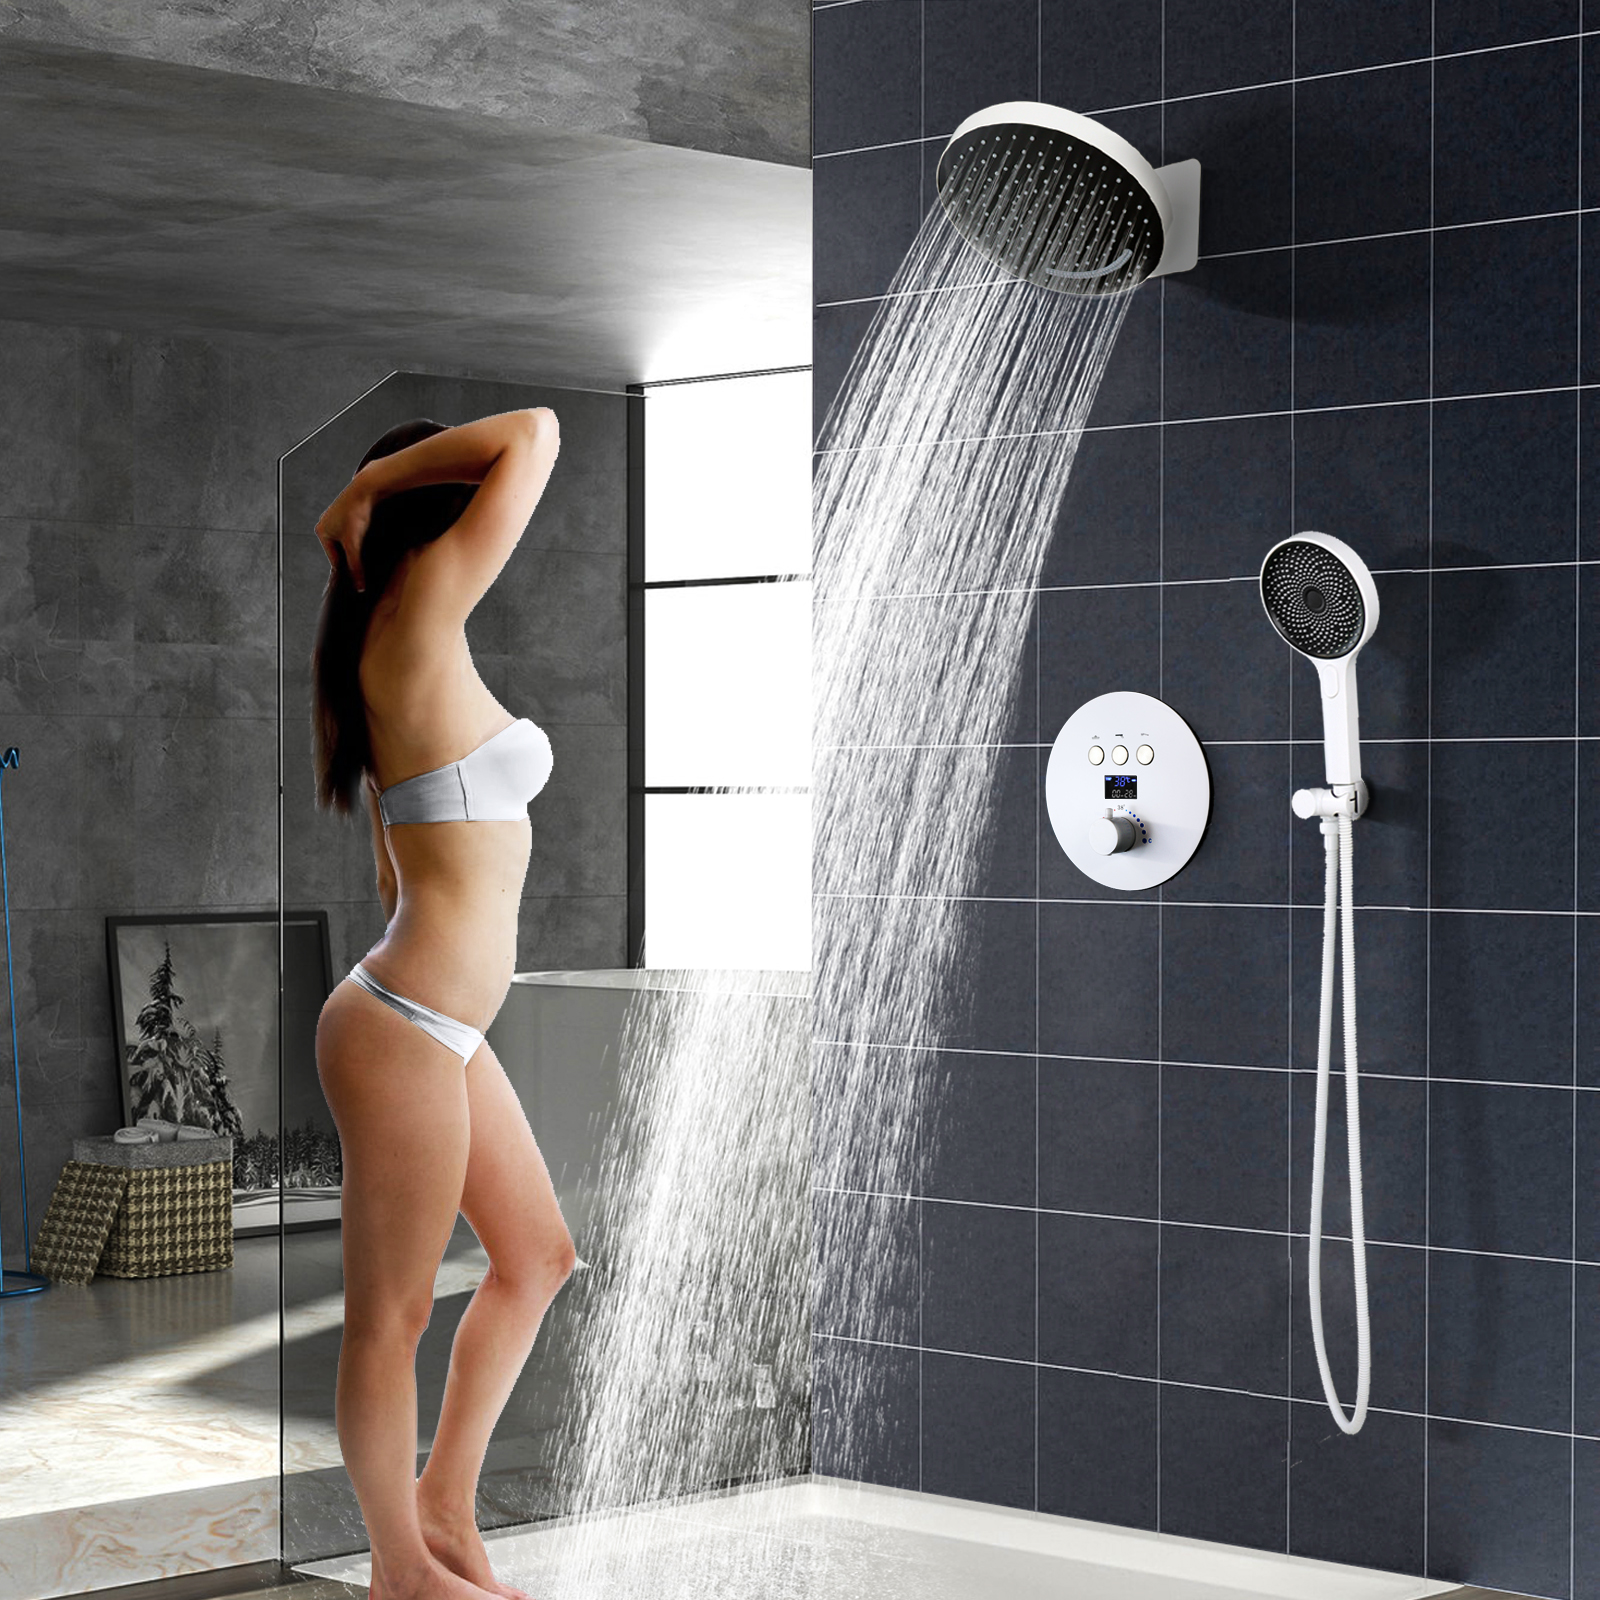 Concealed Shower with Wall Mounted Embedded Shower Set, Concealed Ceiling Shower in Household Bathroom